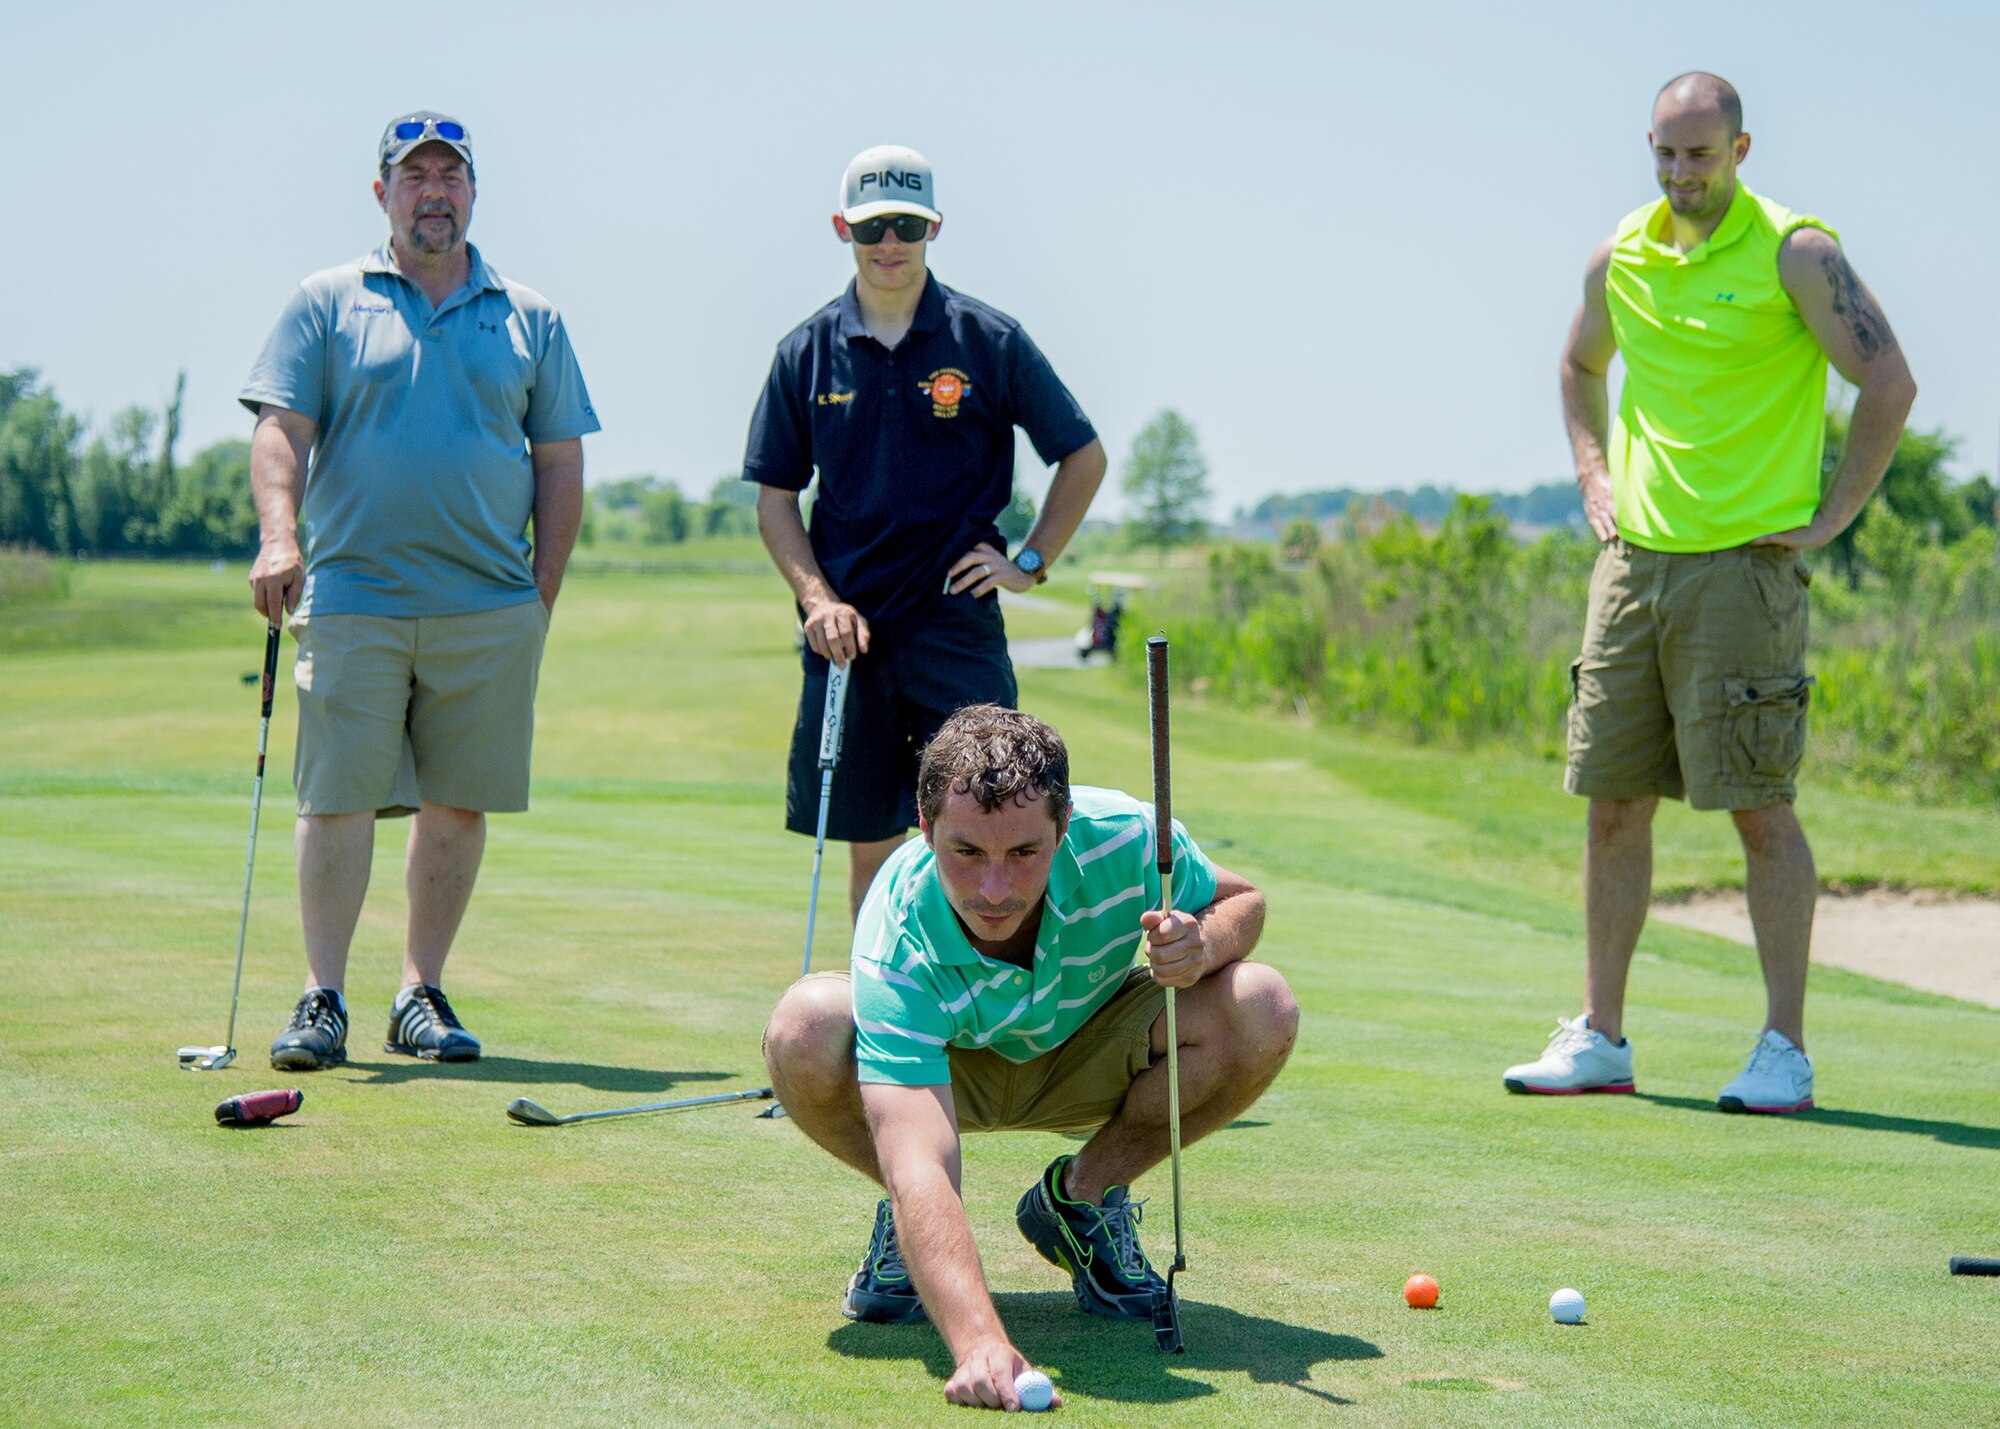 Dover realtor Anthony Lapinsky lines up a putt shot at the 2017 spring Bluesuiters Golf Tournament May 17, 2017, 2016, at the Jonathan’s Landing Golf Course in Magnolia, Delaware. Team Dover Airmen are paired up with local civic and business leaders to build and maintain good community relations. (U.S. Air Force photo by Mauricio Campino)